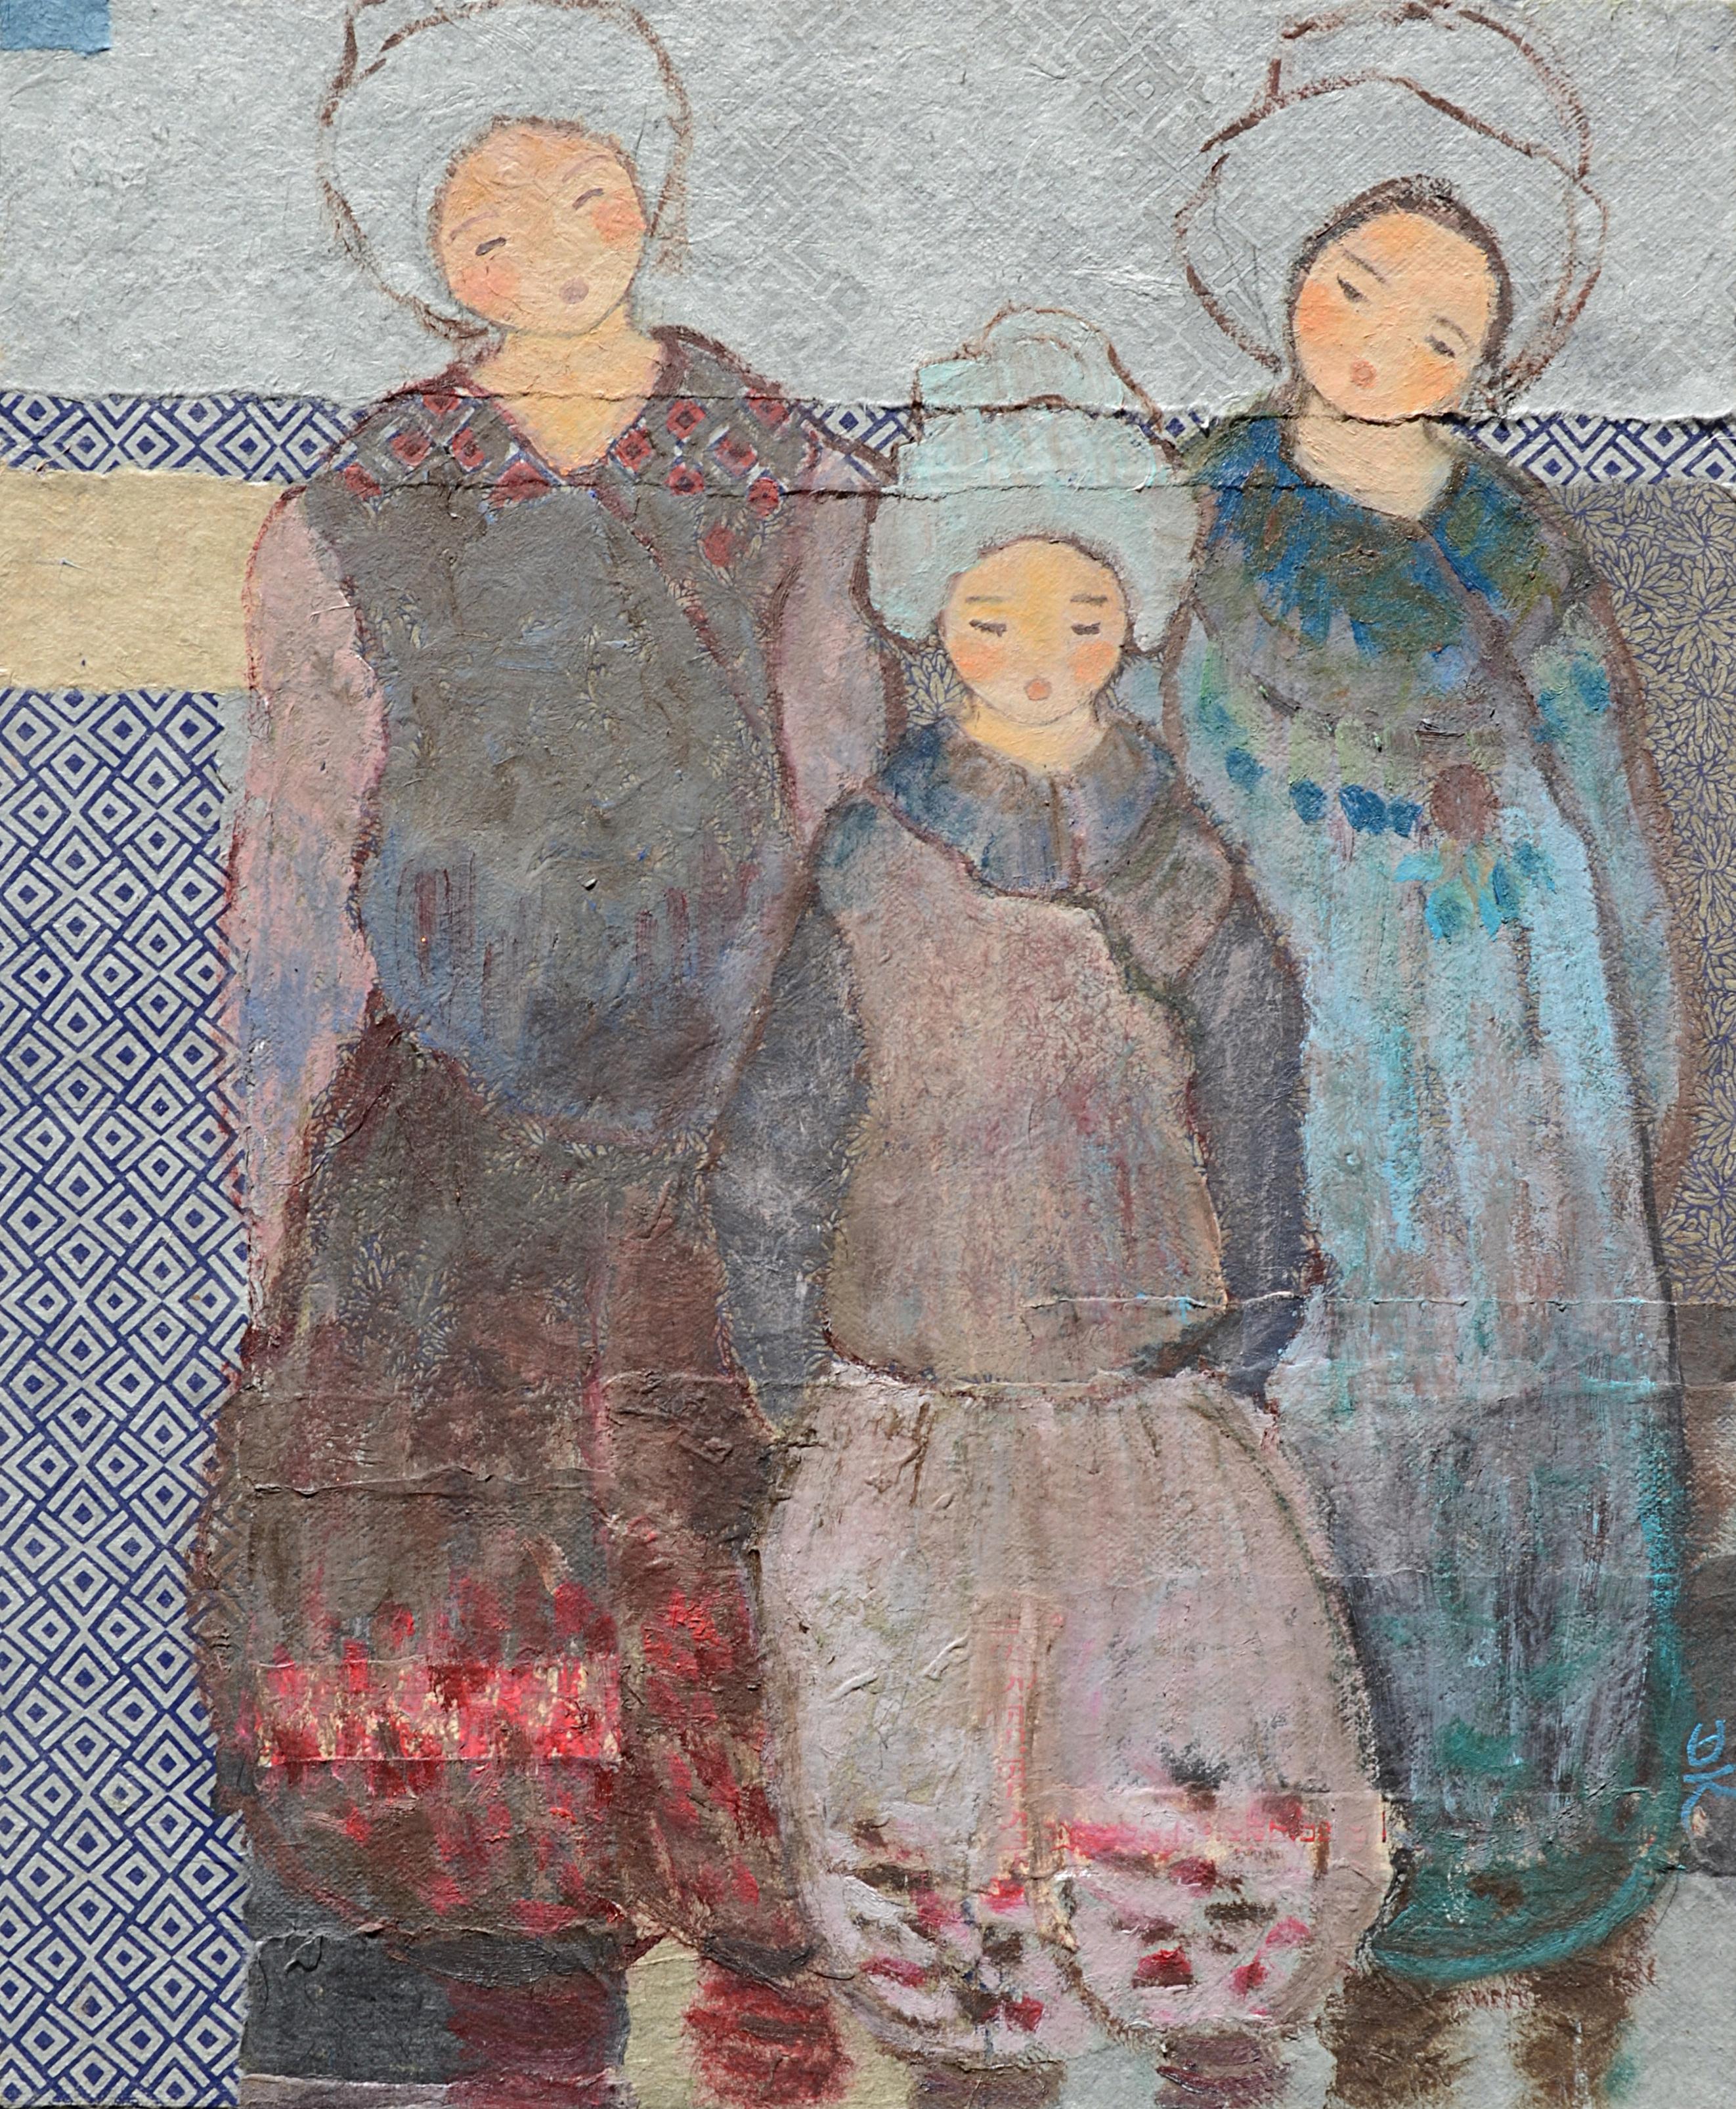 Such a delicate painting !  It depicts three androgynous characters, one smaller than the two others but given the title of the artwork it can be assumed that all are children, seemingly from faraway lands, as suggested from their clothes and